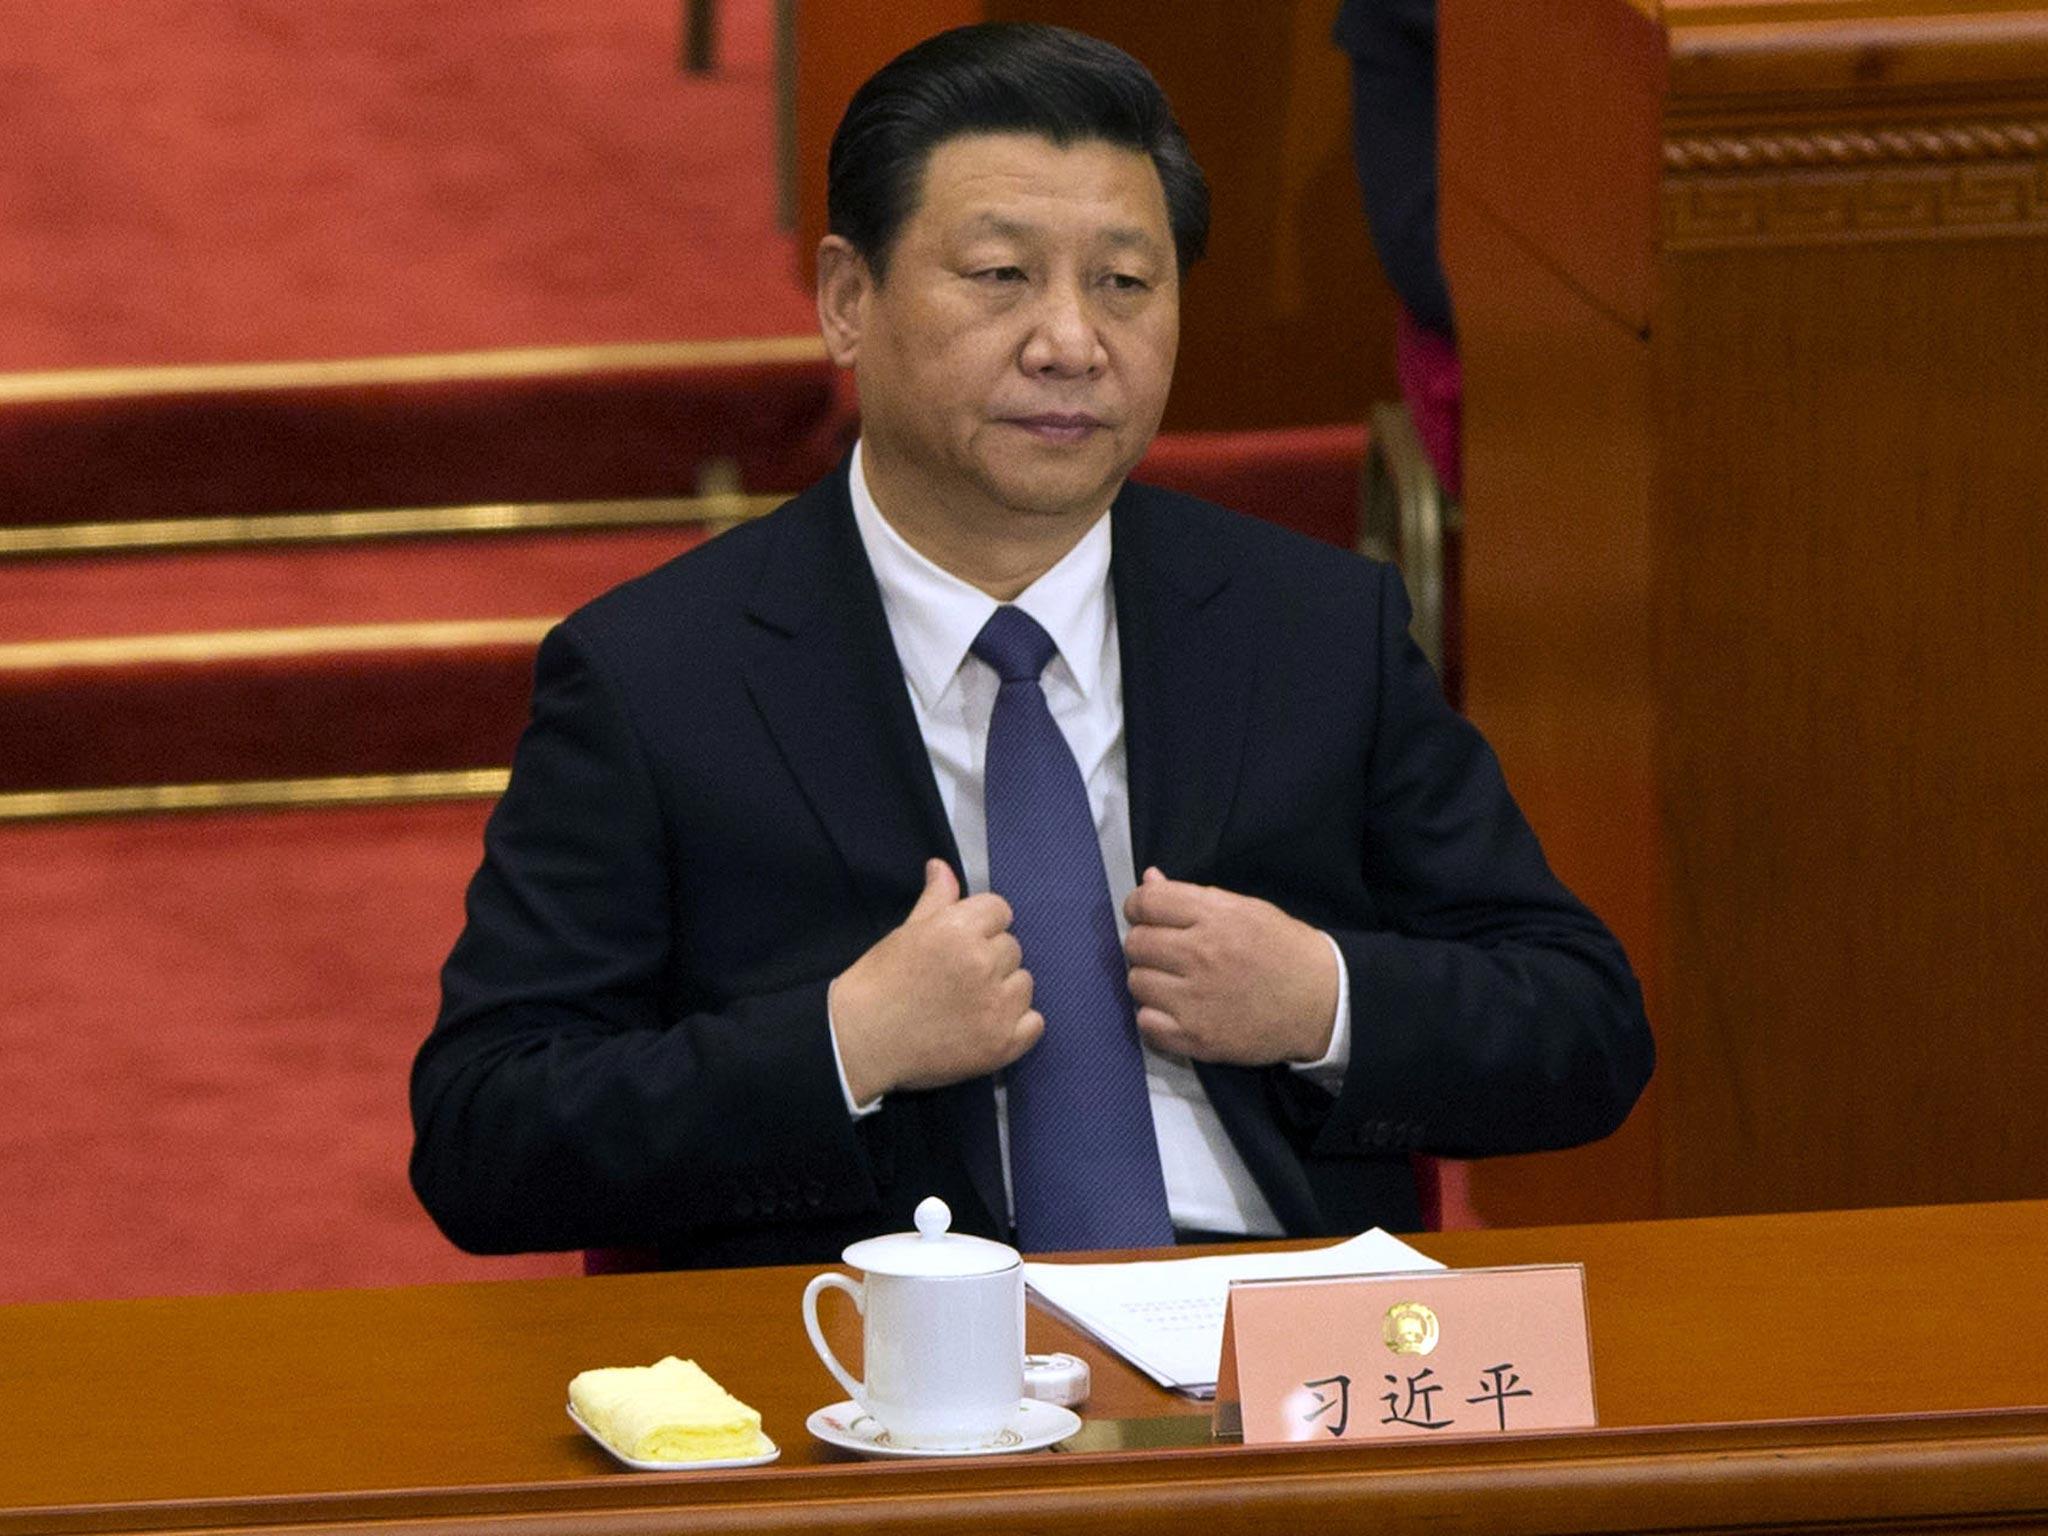 Xi Jinping: China's leader is a man of the People's Republic